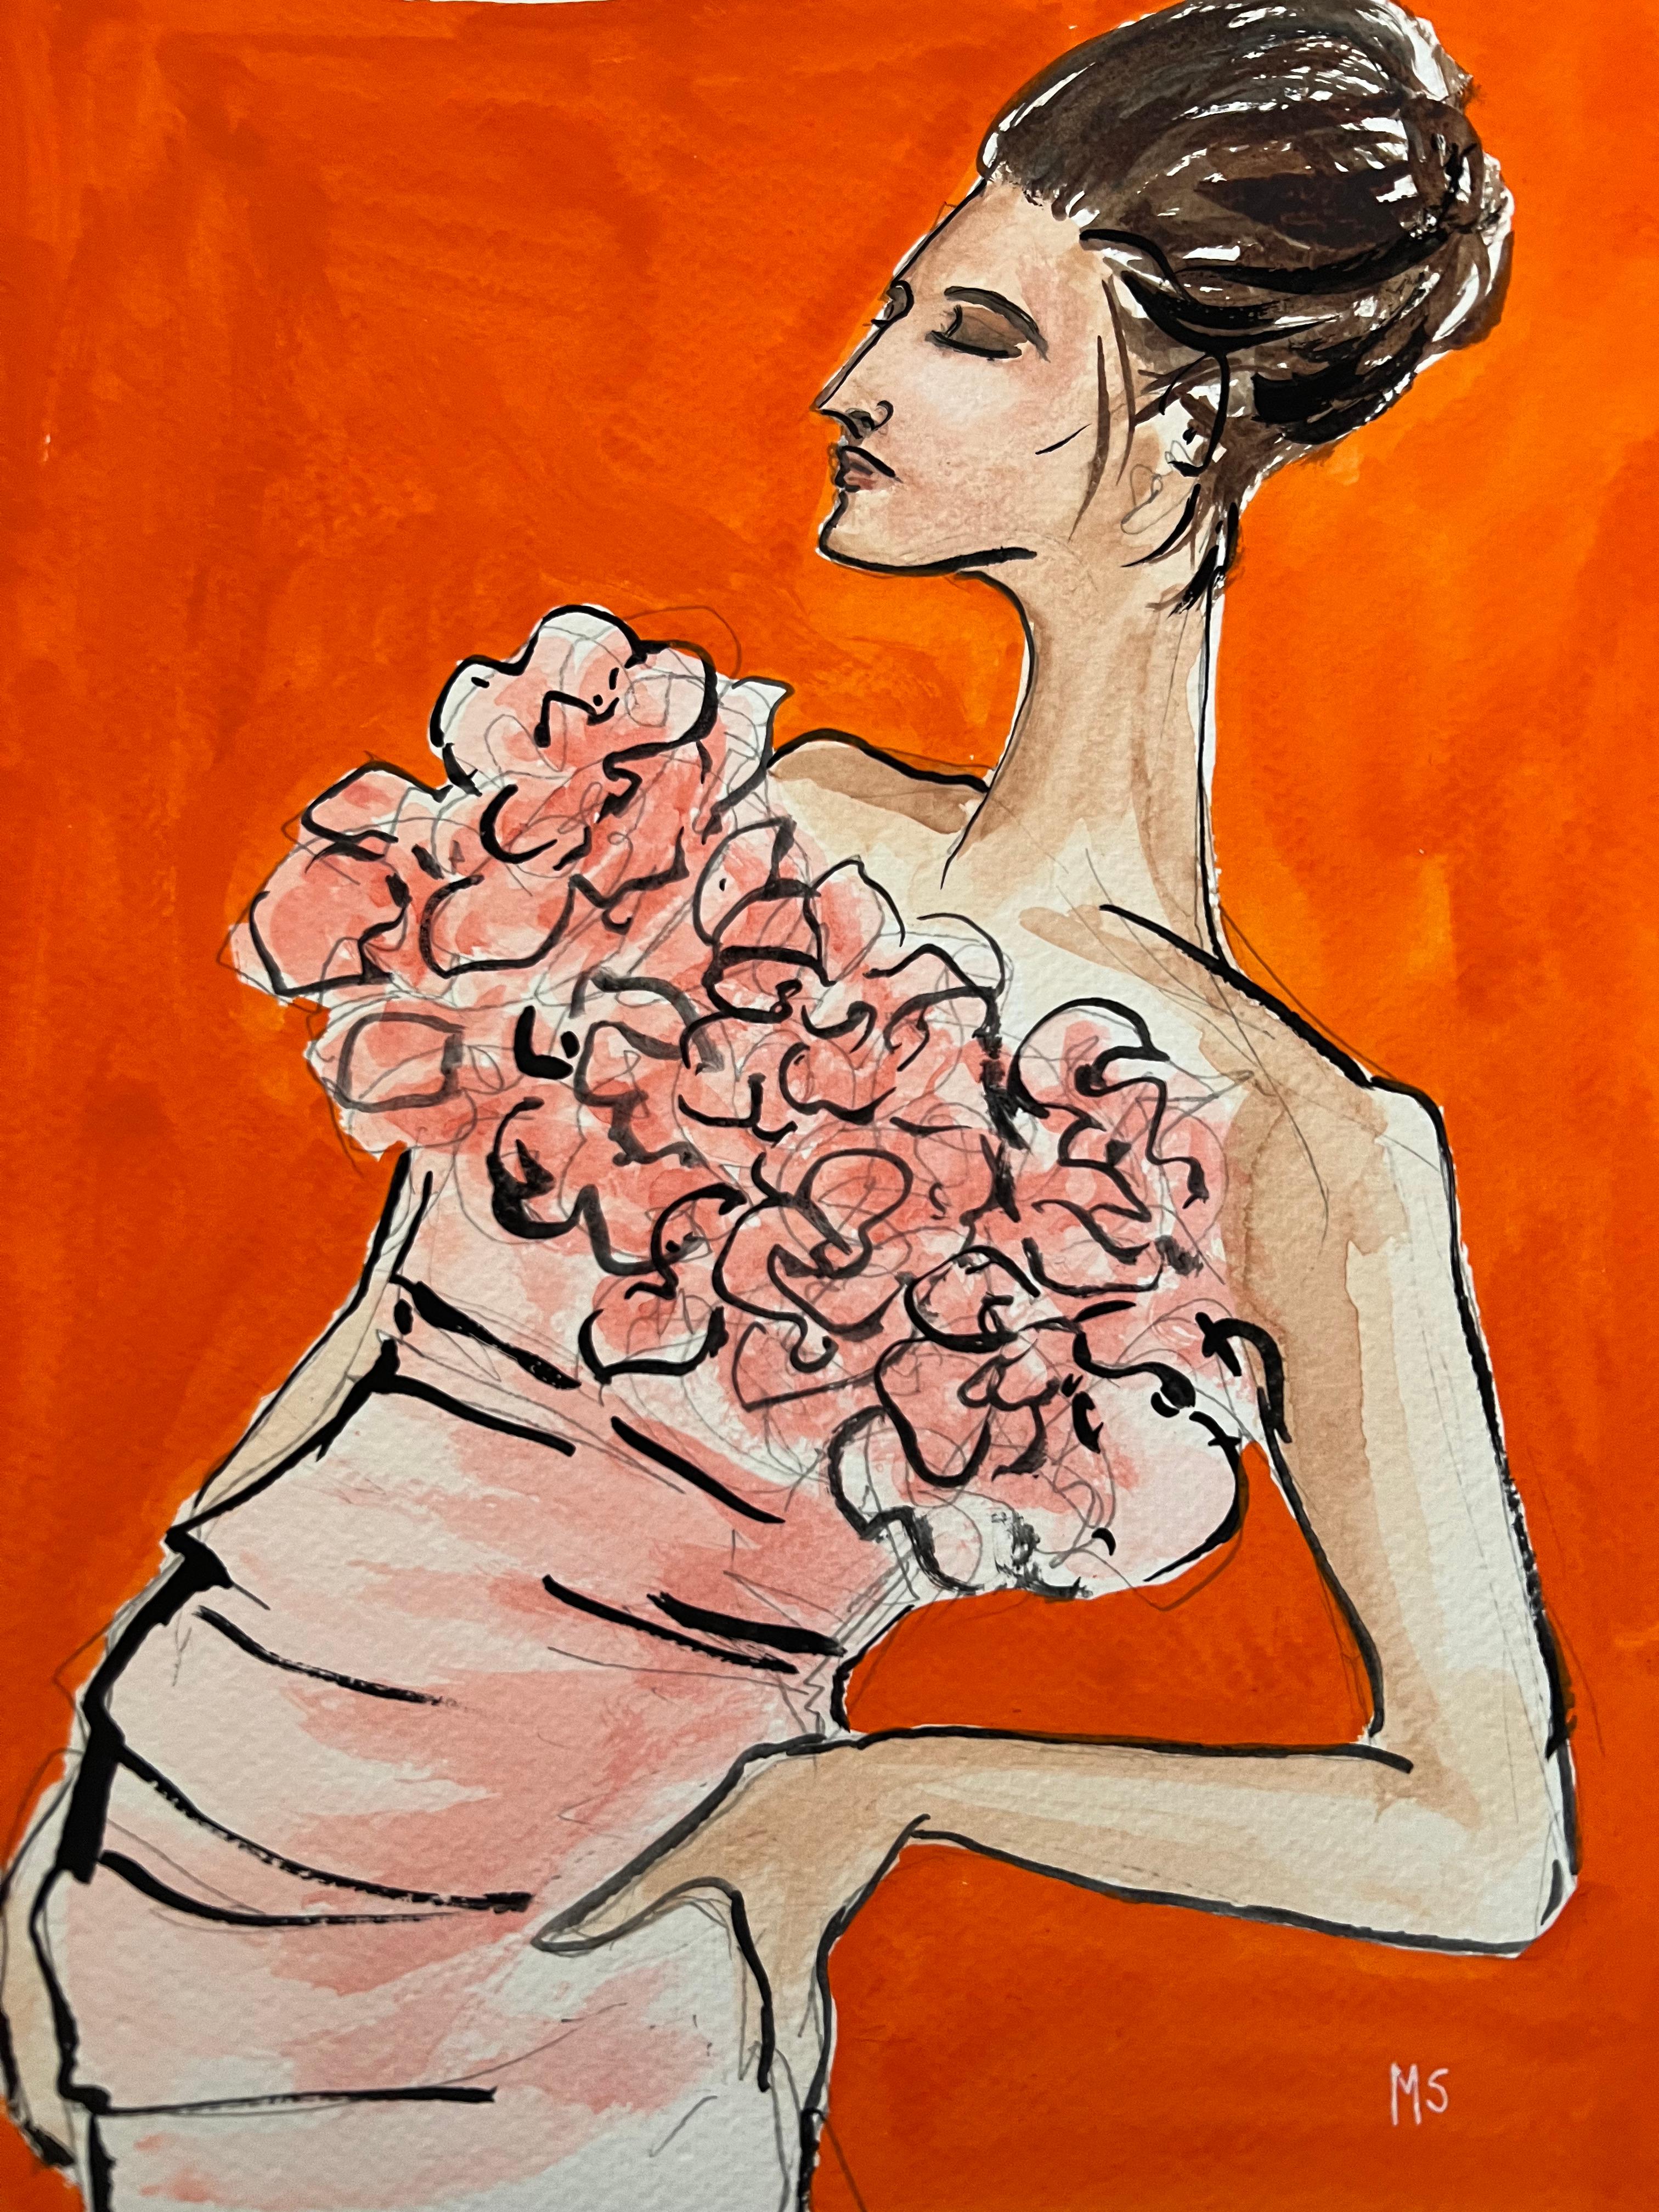 Giambattista Valli Haute couture, by Manuel Santelices
Ink, gouache and watercolor on paper.
Image size: 12 in. H x 9 in. W 
Unframed
2023

The worlds of fashion, society, and pop culture are explored through the illustrations of Manuel Santelices,